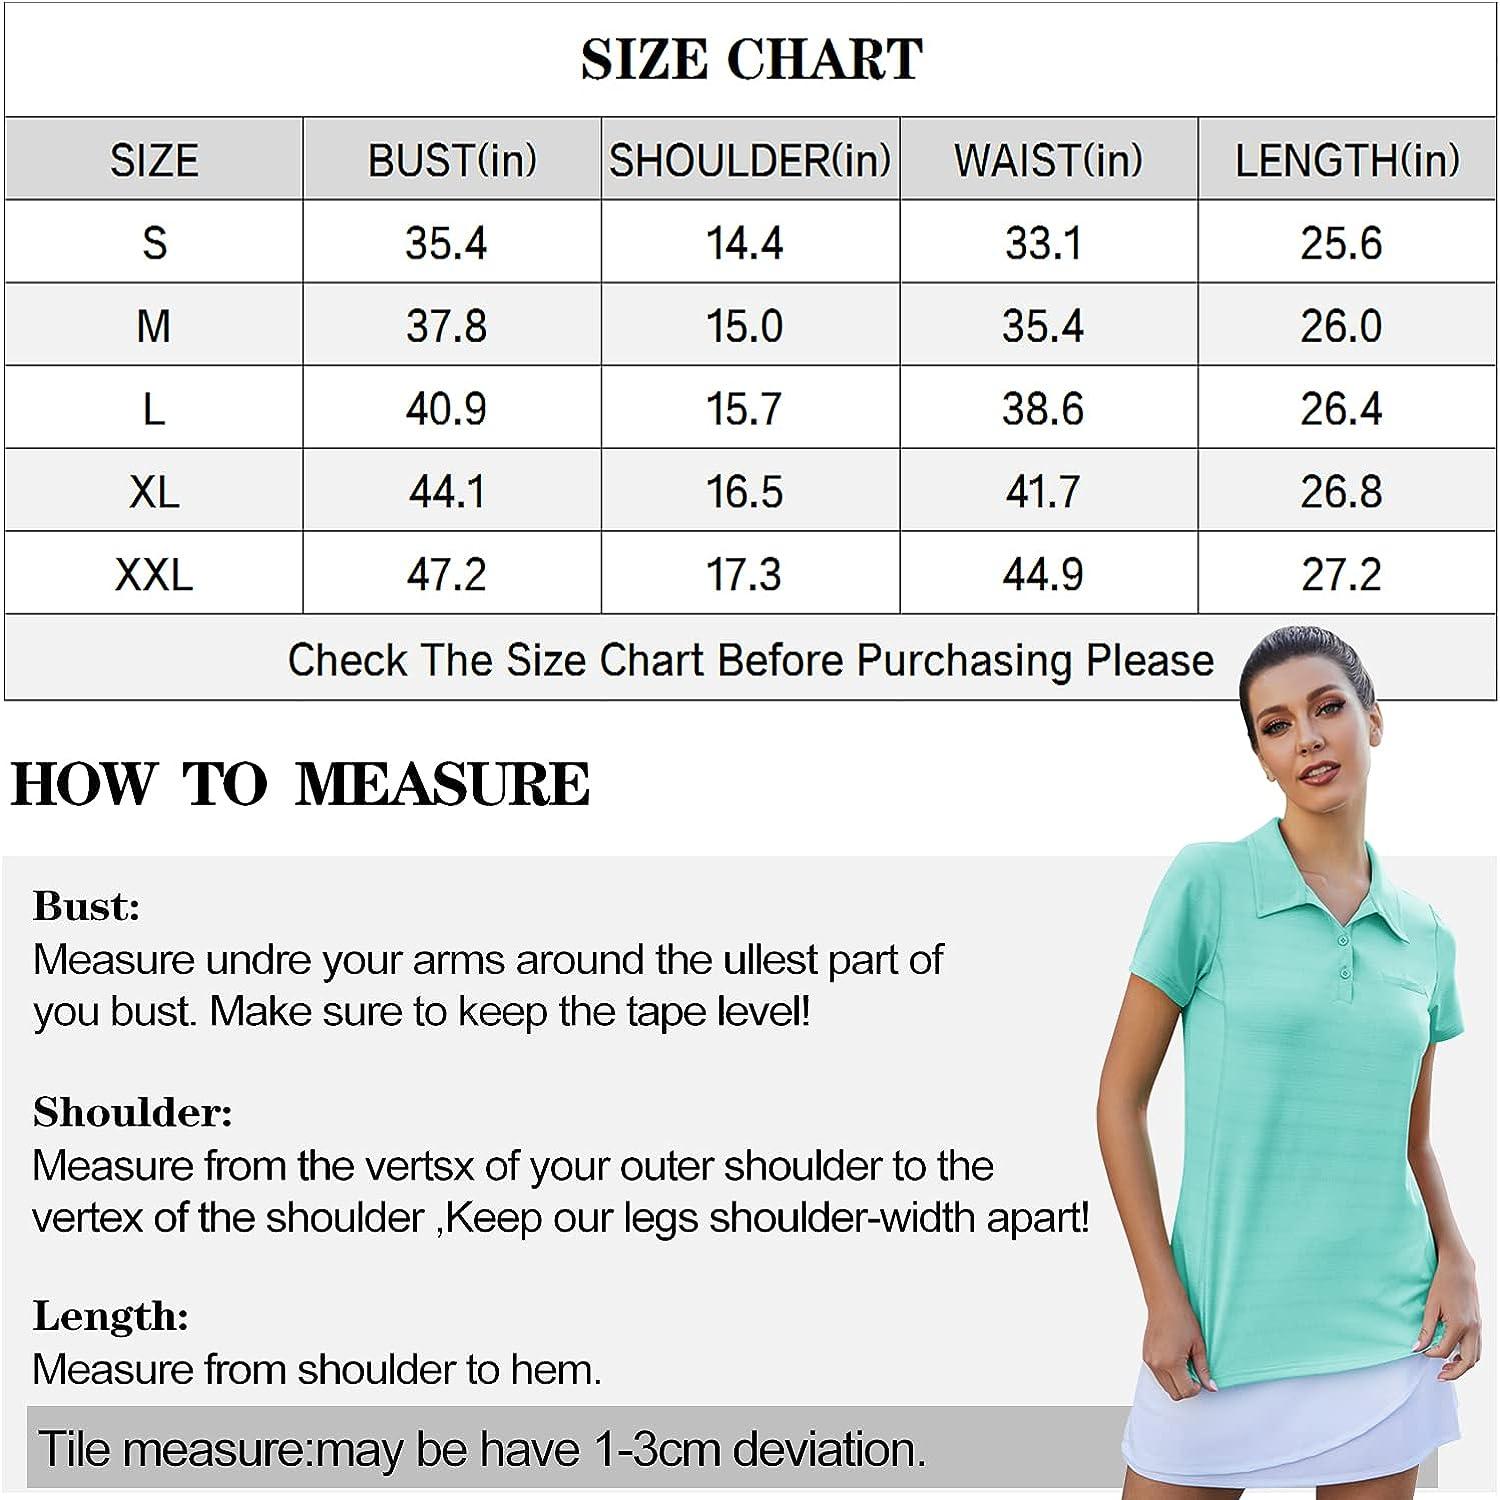  Loovoo Womans Basic Tops Crop Baby Tee Hiking Tennis Golf T- Shirts Tight Fitted Running 2 Packs Sets Seamless Dri Fit Clothes : Clothing,  Shoes & Jewelry